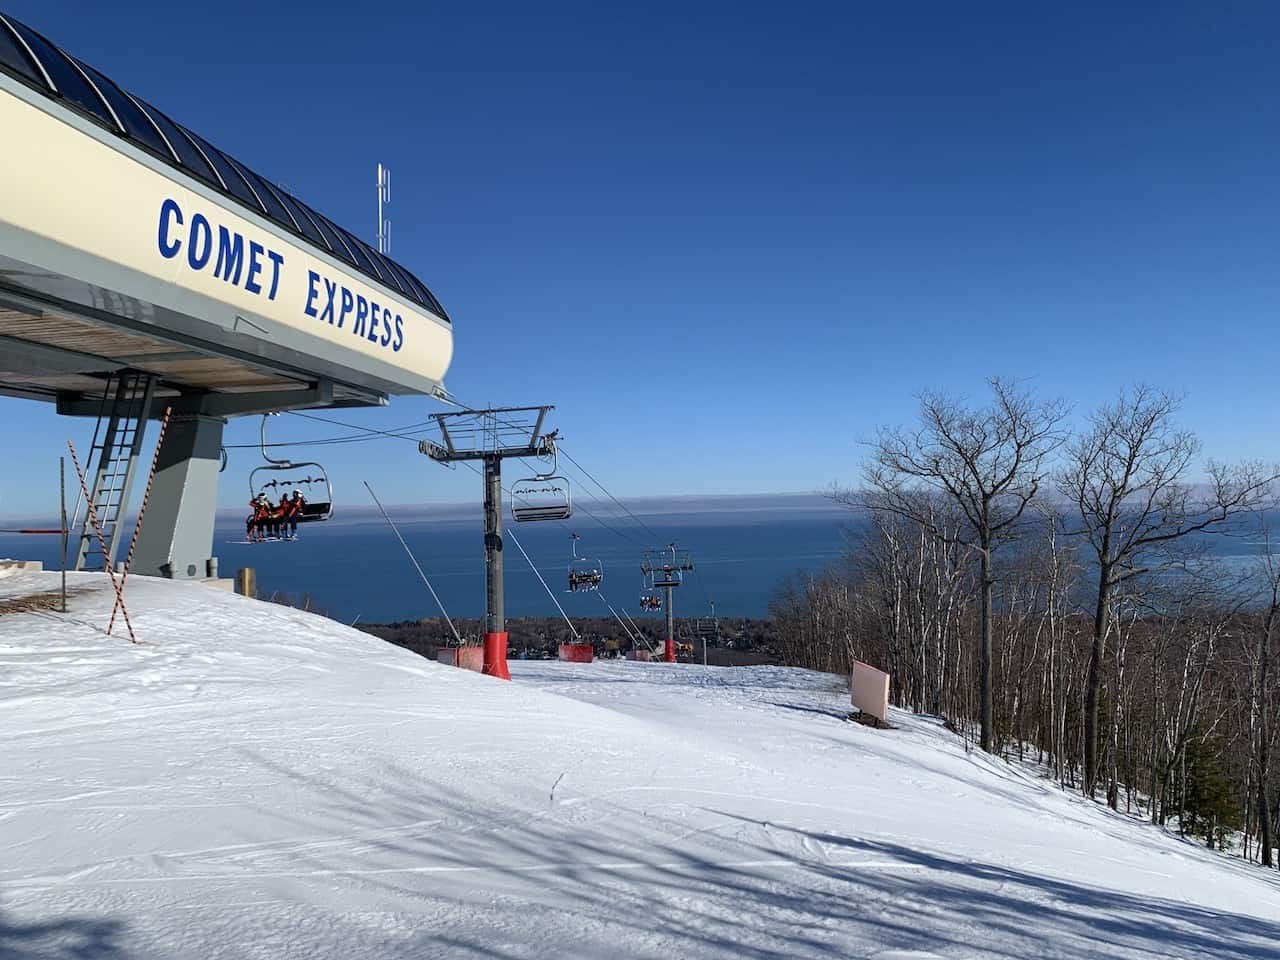 Top of the Comet Express at Craigleith Ski Club - The Comet Express is one of the 5 ski lifts offered at Craigleith Ski Club in The Blue Mountains, Ontario, Canada.